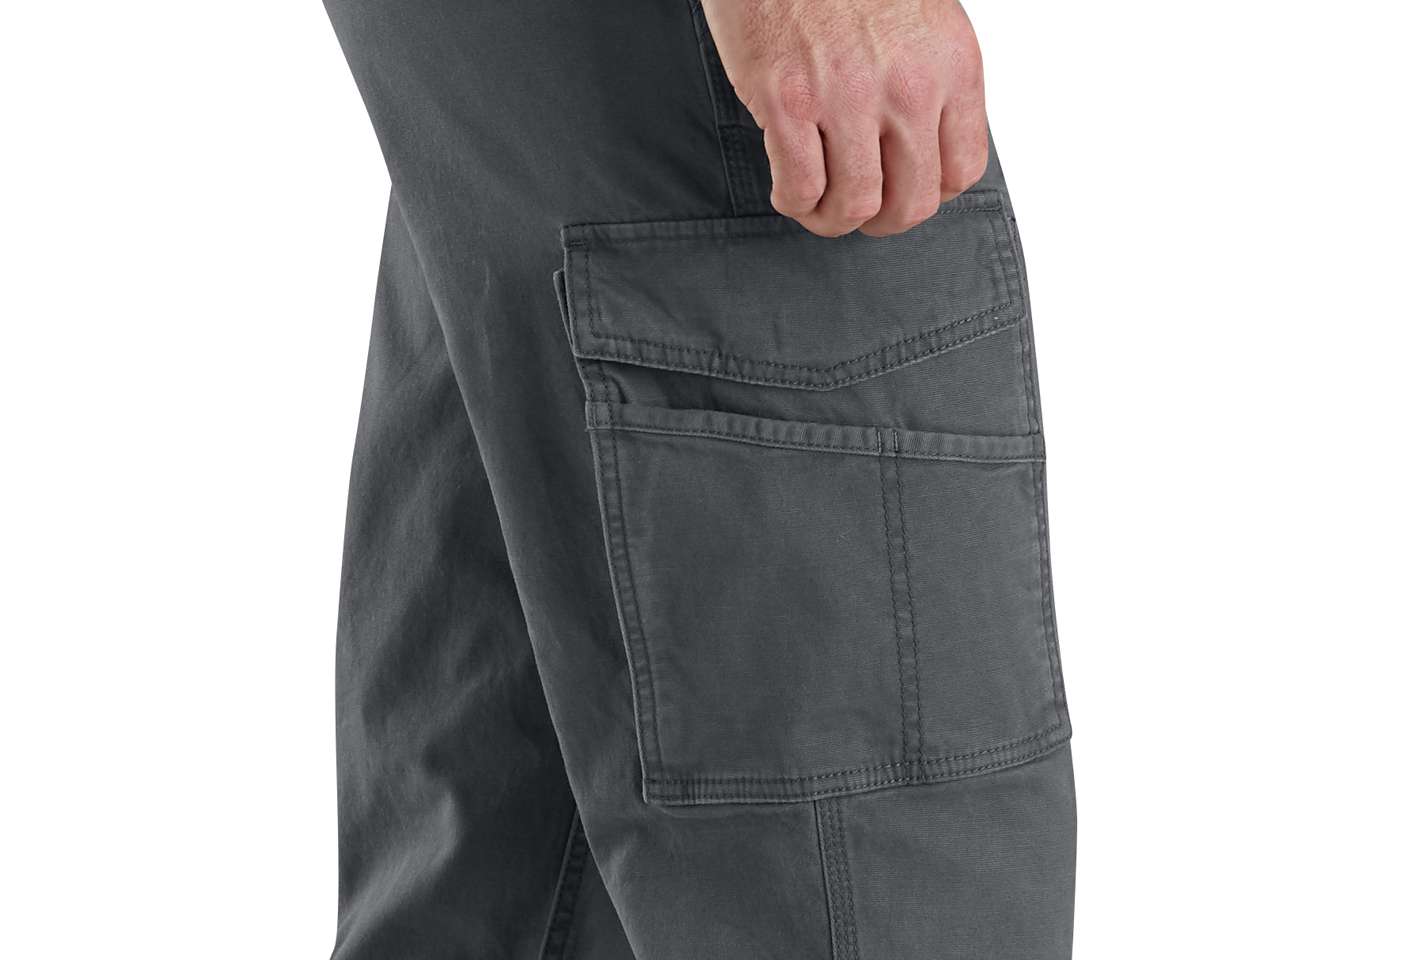 Cargo pocket with cell phone slot for secure storage